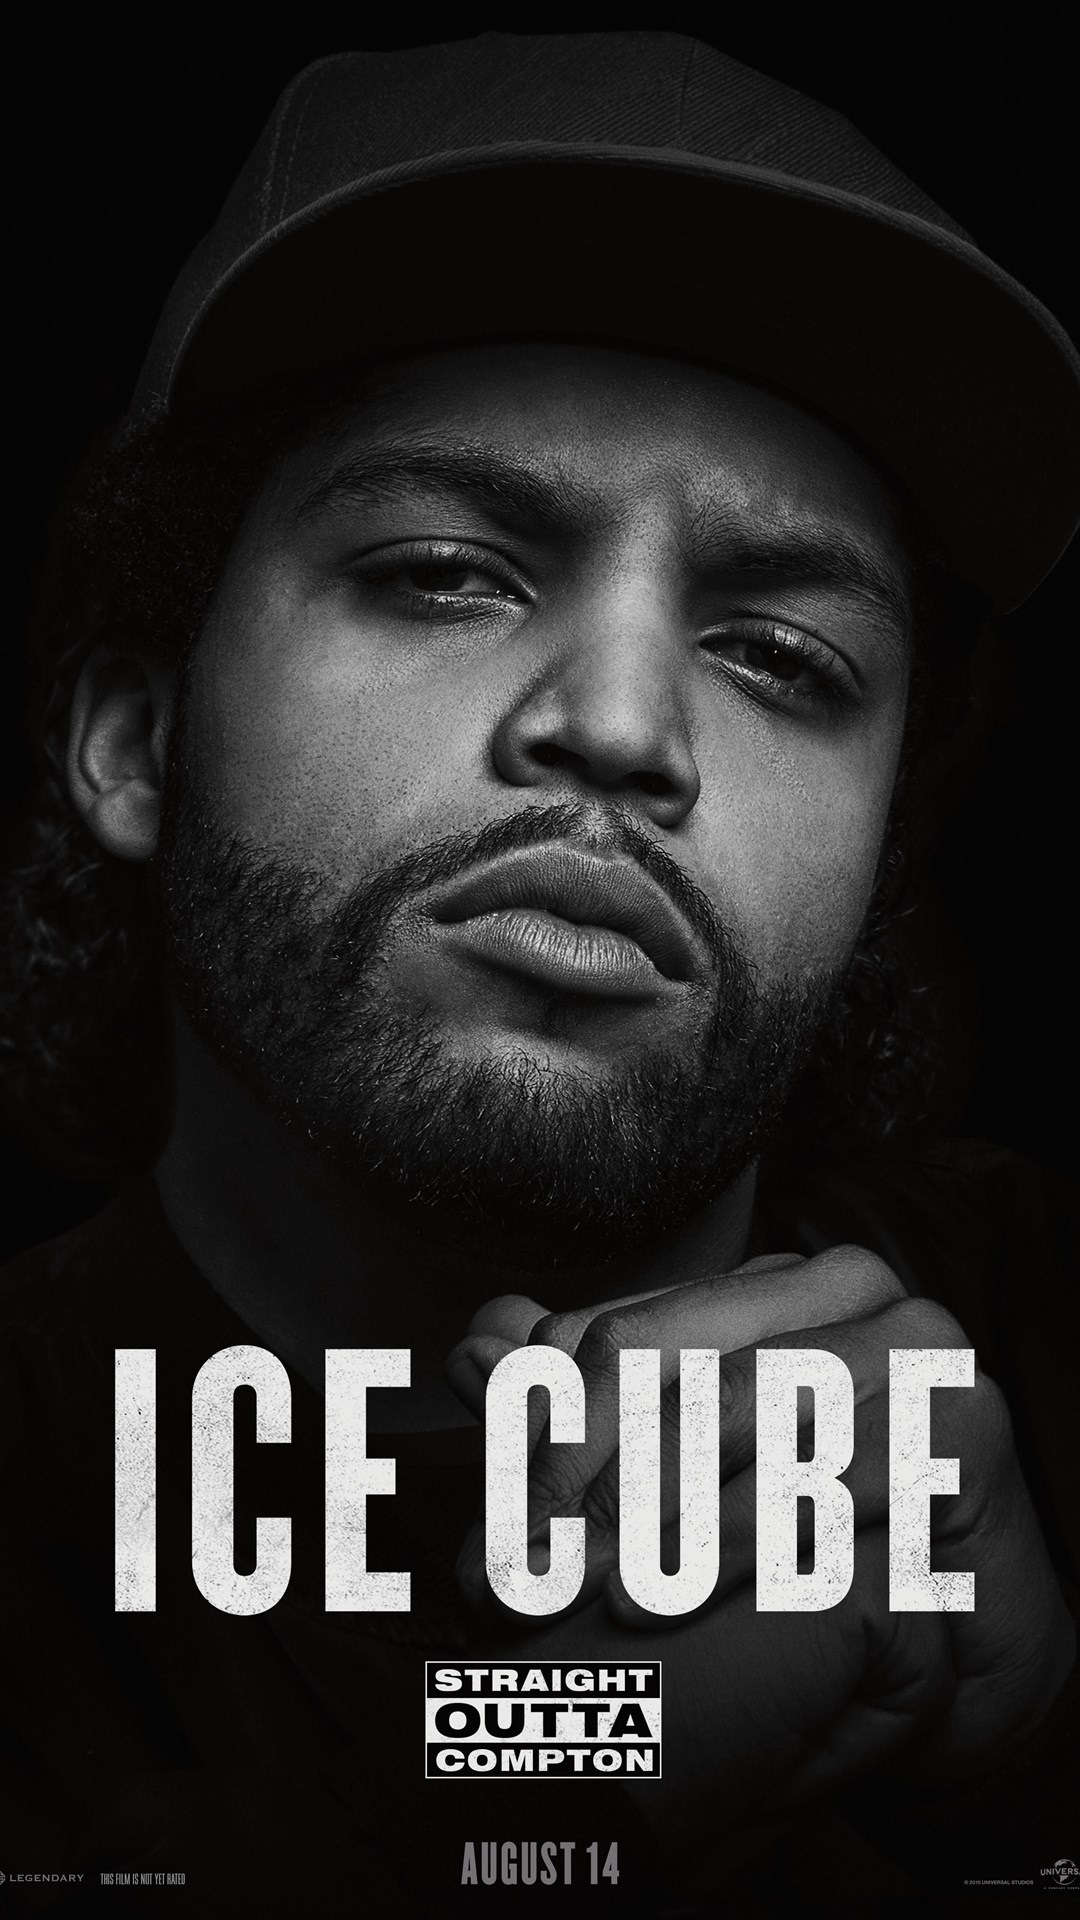 Ice cube phone wallpaper 1080P 2k 4k Full HD Wallpapers Backgrounds  Free Download  Wallpaper Crafter